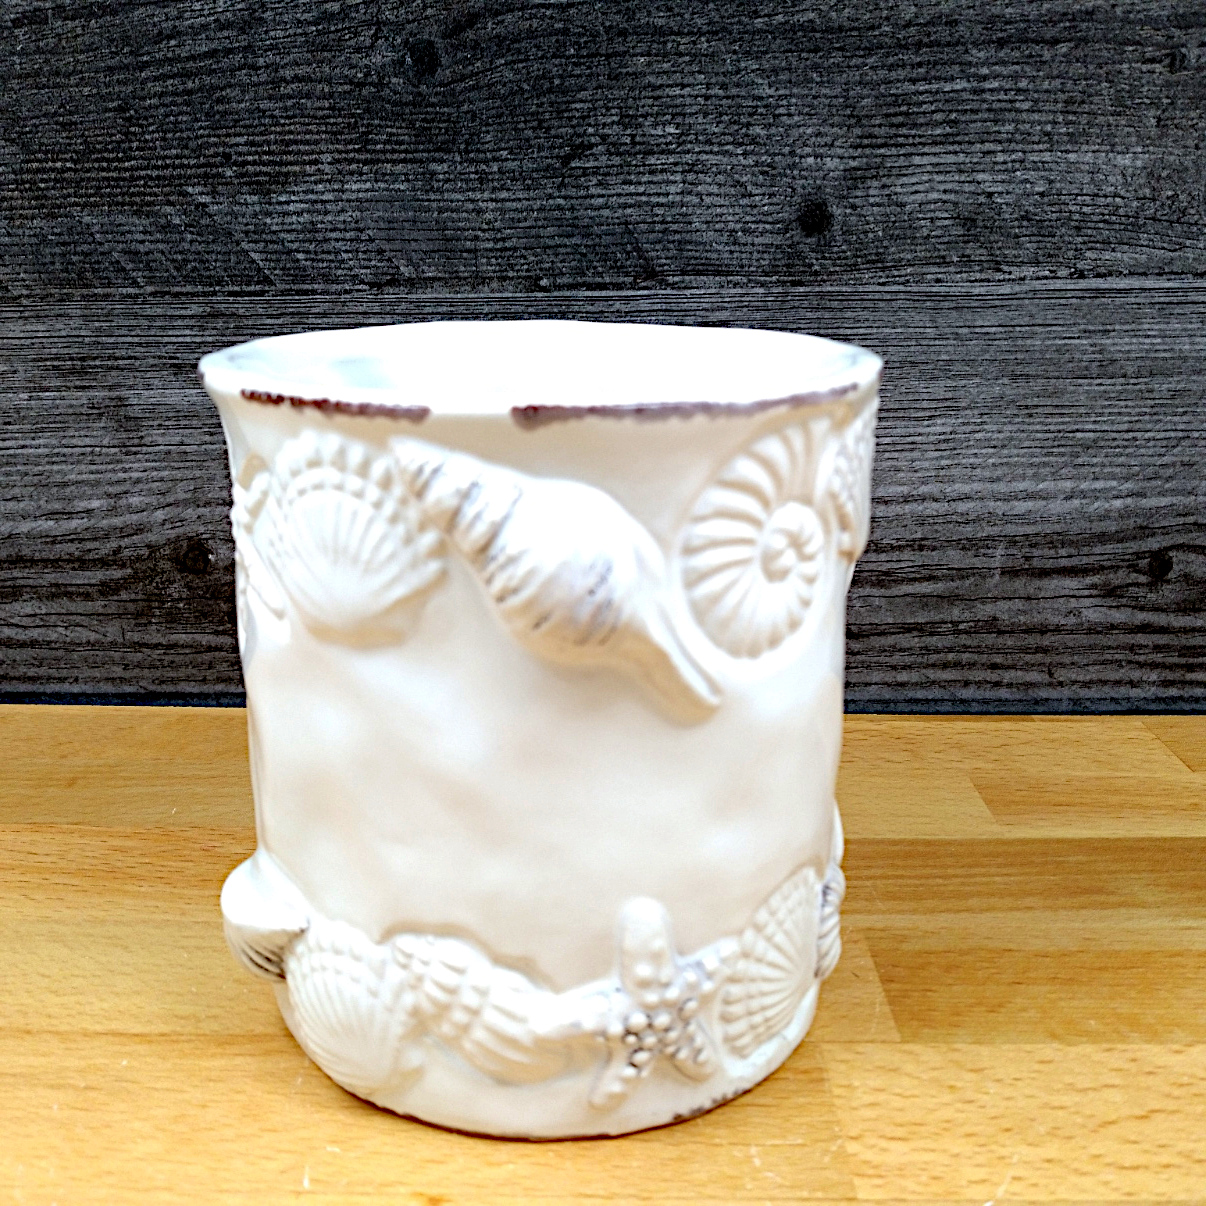 This Sea Shells Laguna Coastal White Coffee Mug Embossed Nautical Tea Cup by Blue Sky is made with love by Premier Homegoods! Shop more unique gift ideas today with Spots Initiatives, the best way to support creators.